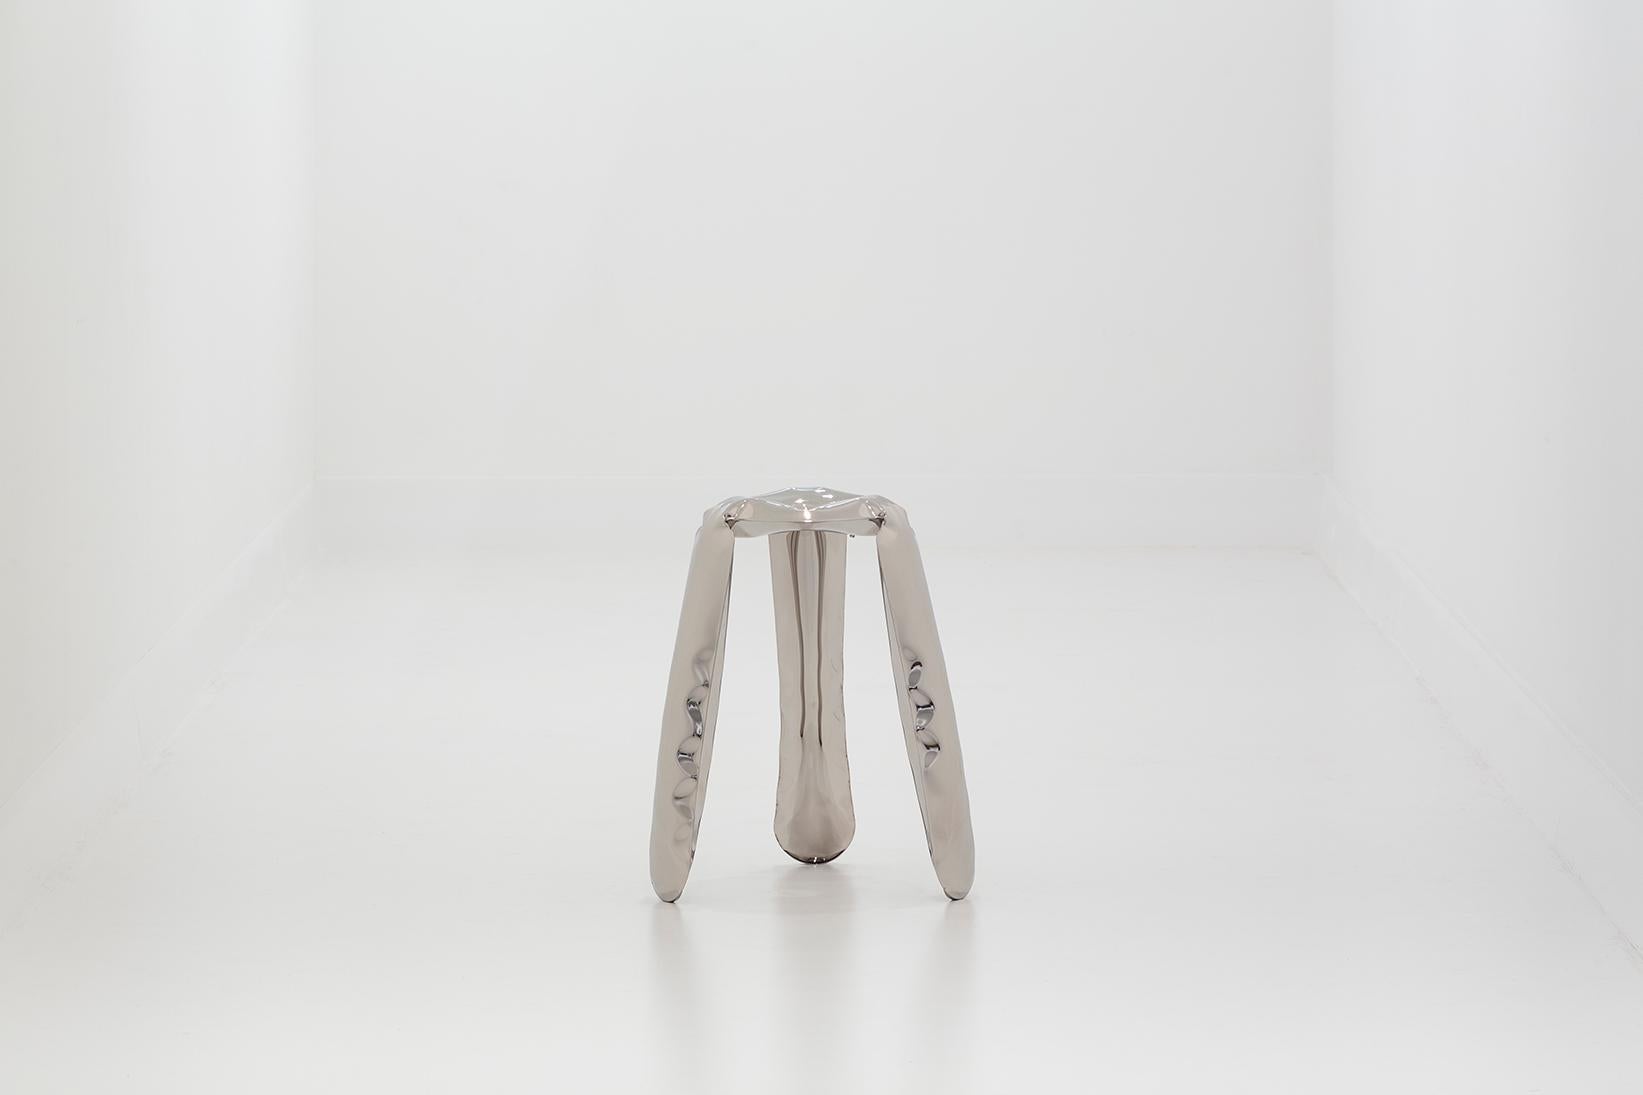 Plopp stool is an icon and a bestseller of Zieta Prozessdesign. The unique, toy-looking and playful shape of Plopp is an effect of an innovative forming method, FIDU. FIDU technology means that two ultra-thin steel sheets are welded together around